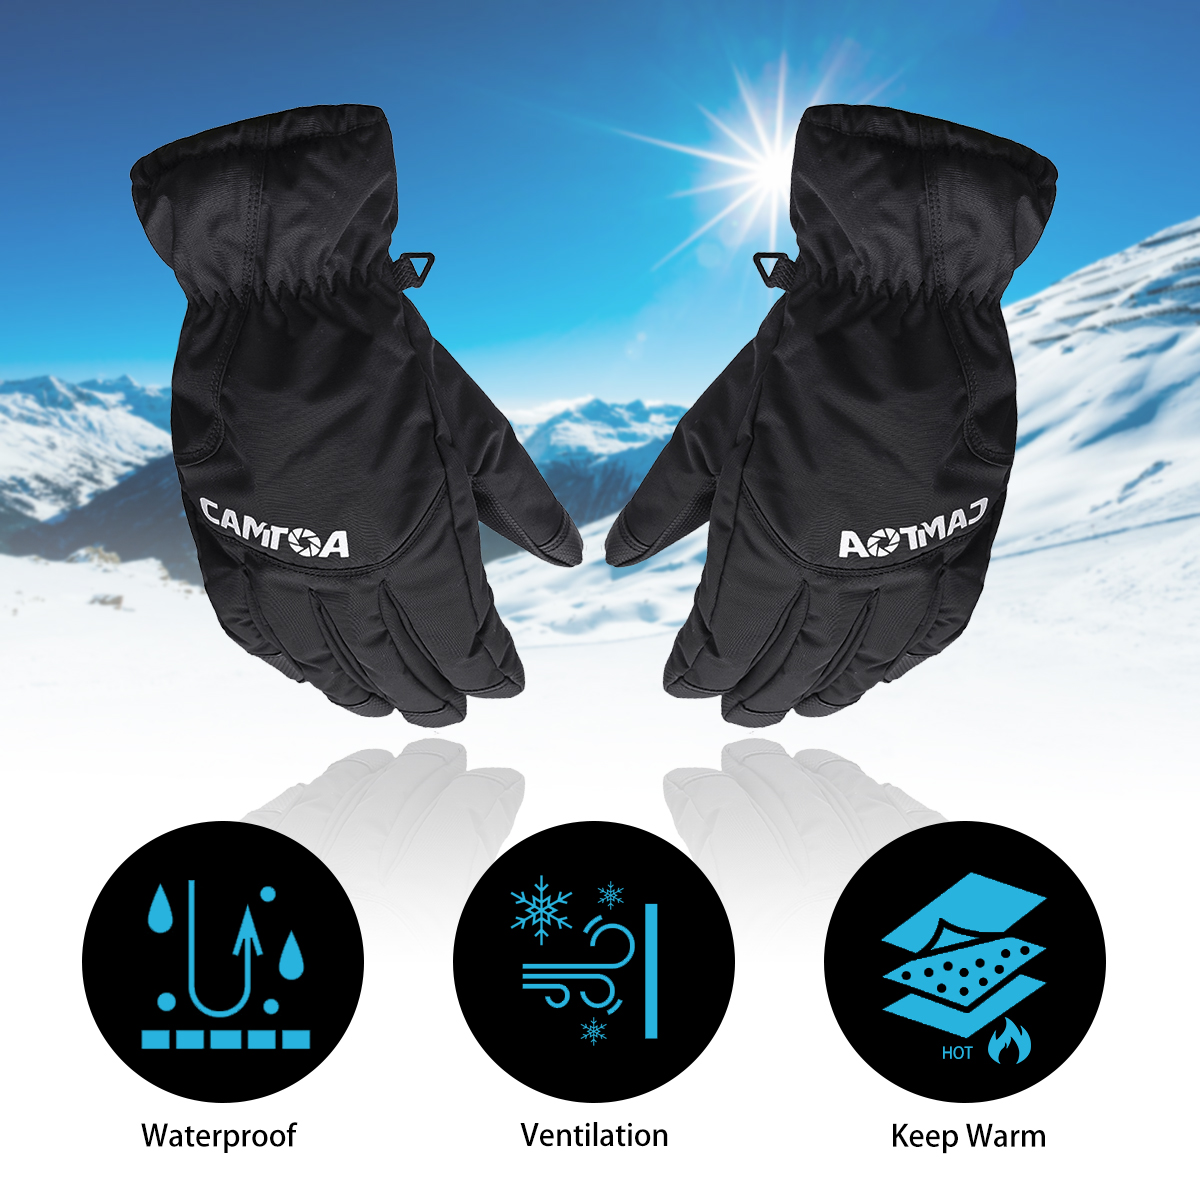 CAMTOA-Winter-Skiing-Gloves-3M-Thinsulate-Warm-Waterproof-Breathable-Snow-Gloves-for-Men-and-Women-1397724-1